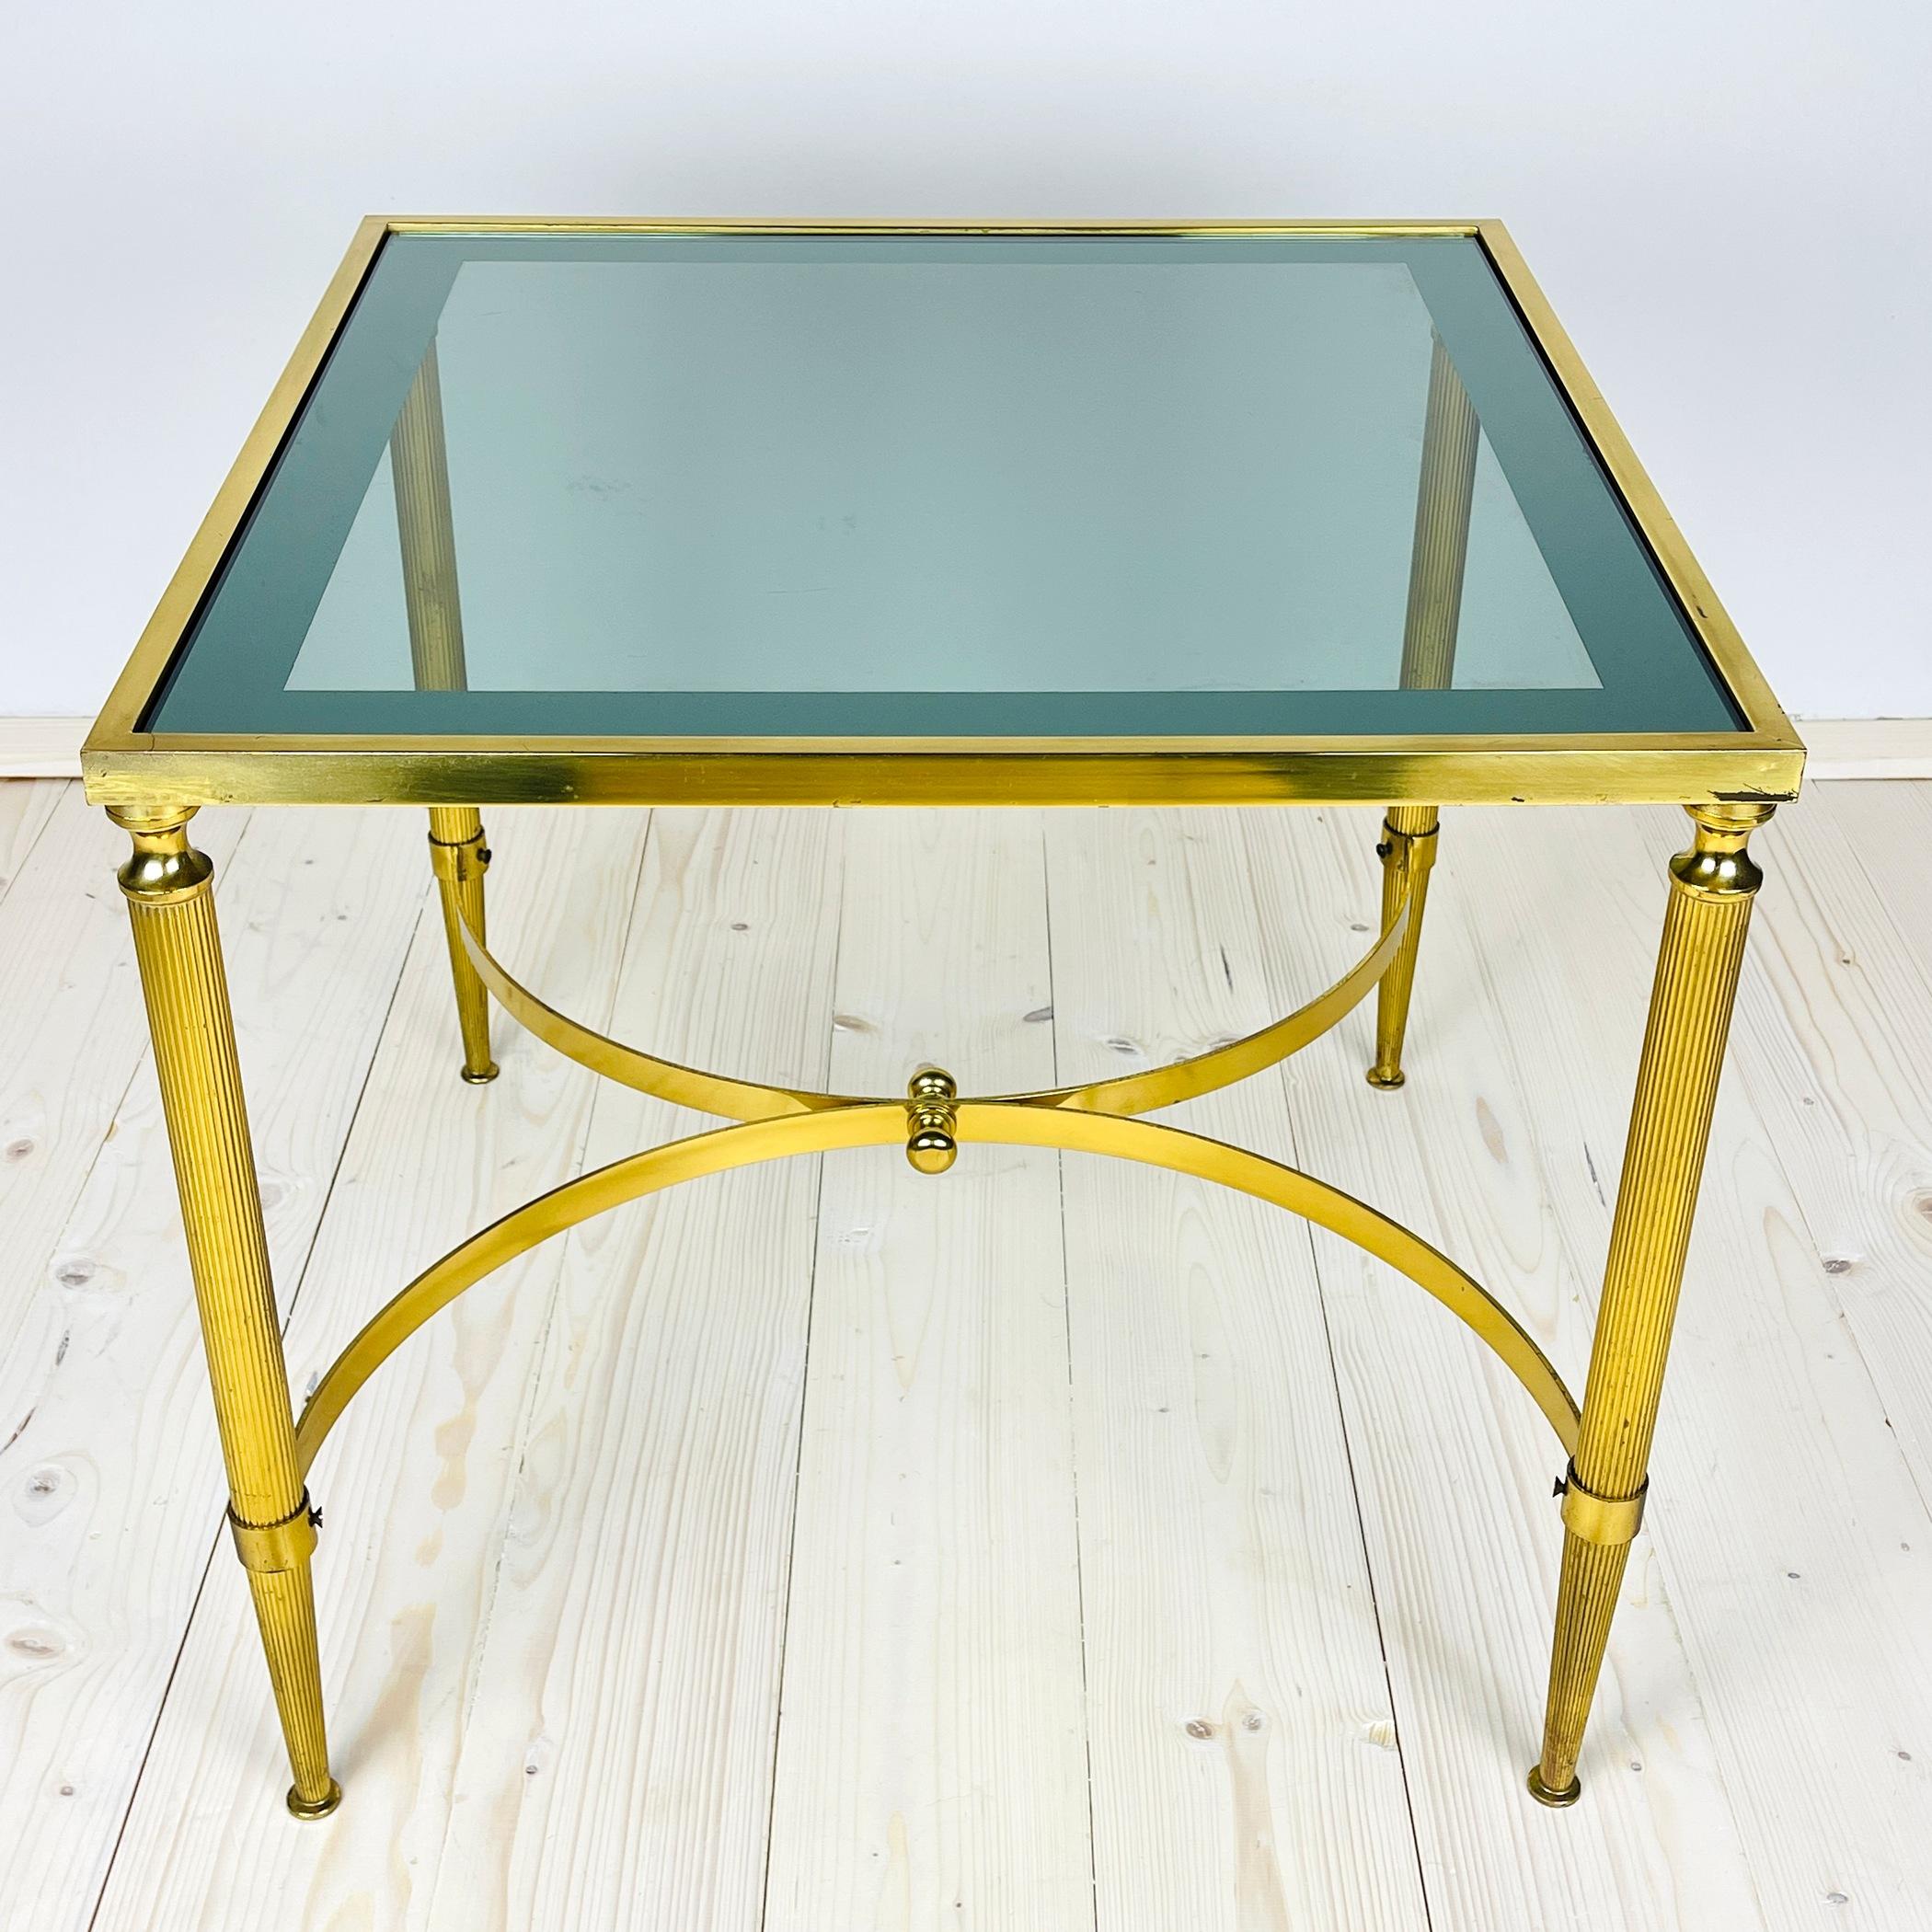 This amazing brass side table was made in Italy in the 70s. Very comfortable to use. You can place drinks, books, phone or purse on it. It is also a beautiful vintage decor piece. It is as usable as it is good-looking, so it is perfect for every